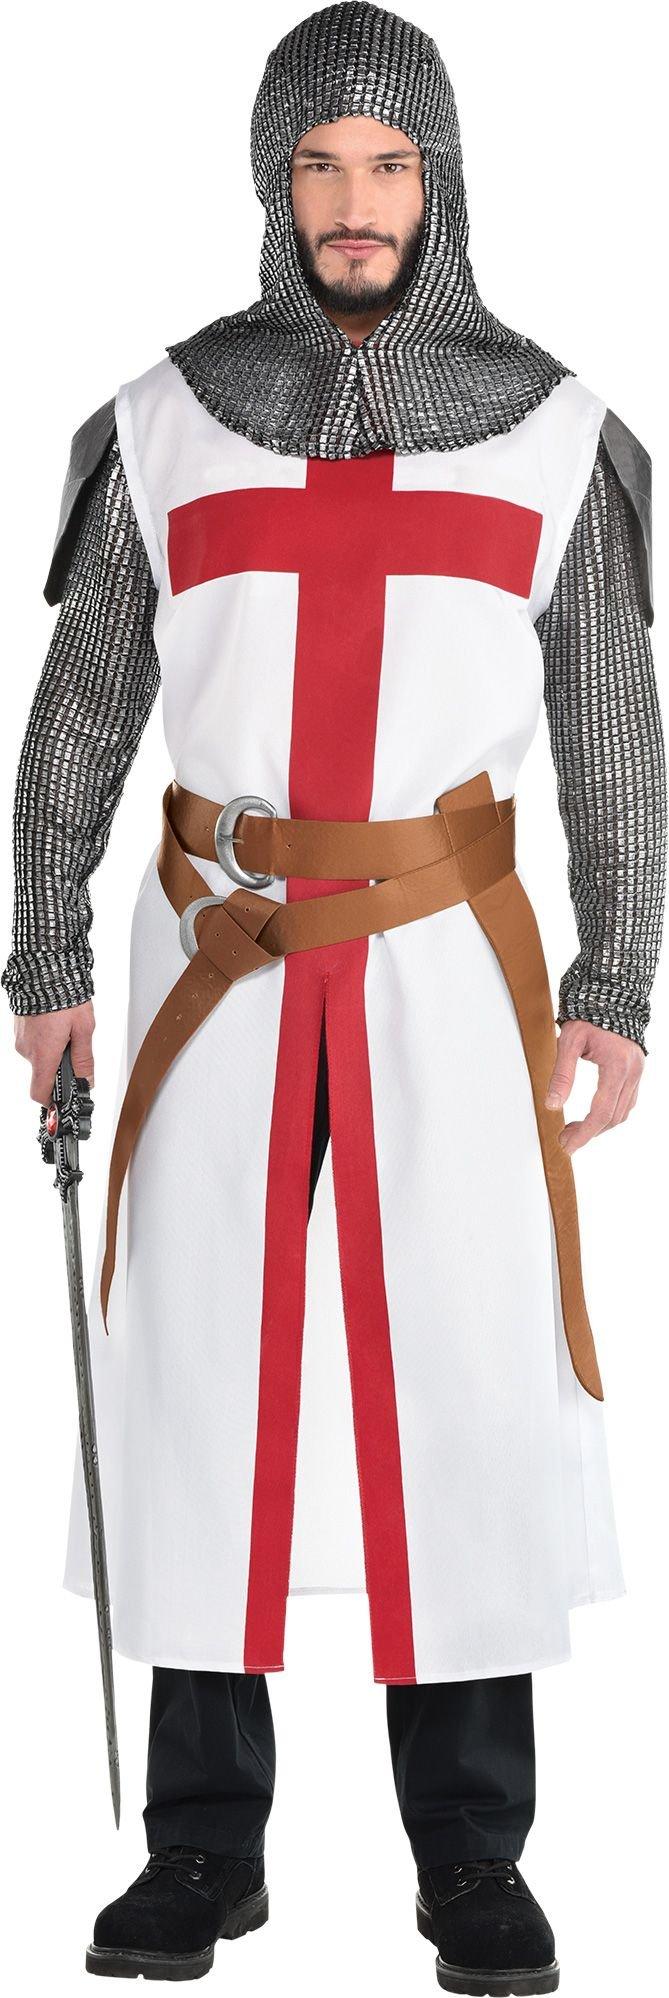 Adult Crusader Warrior Costume | Party City